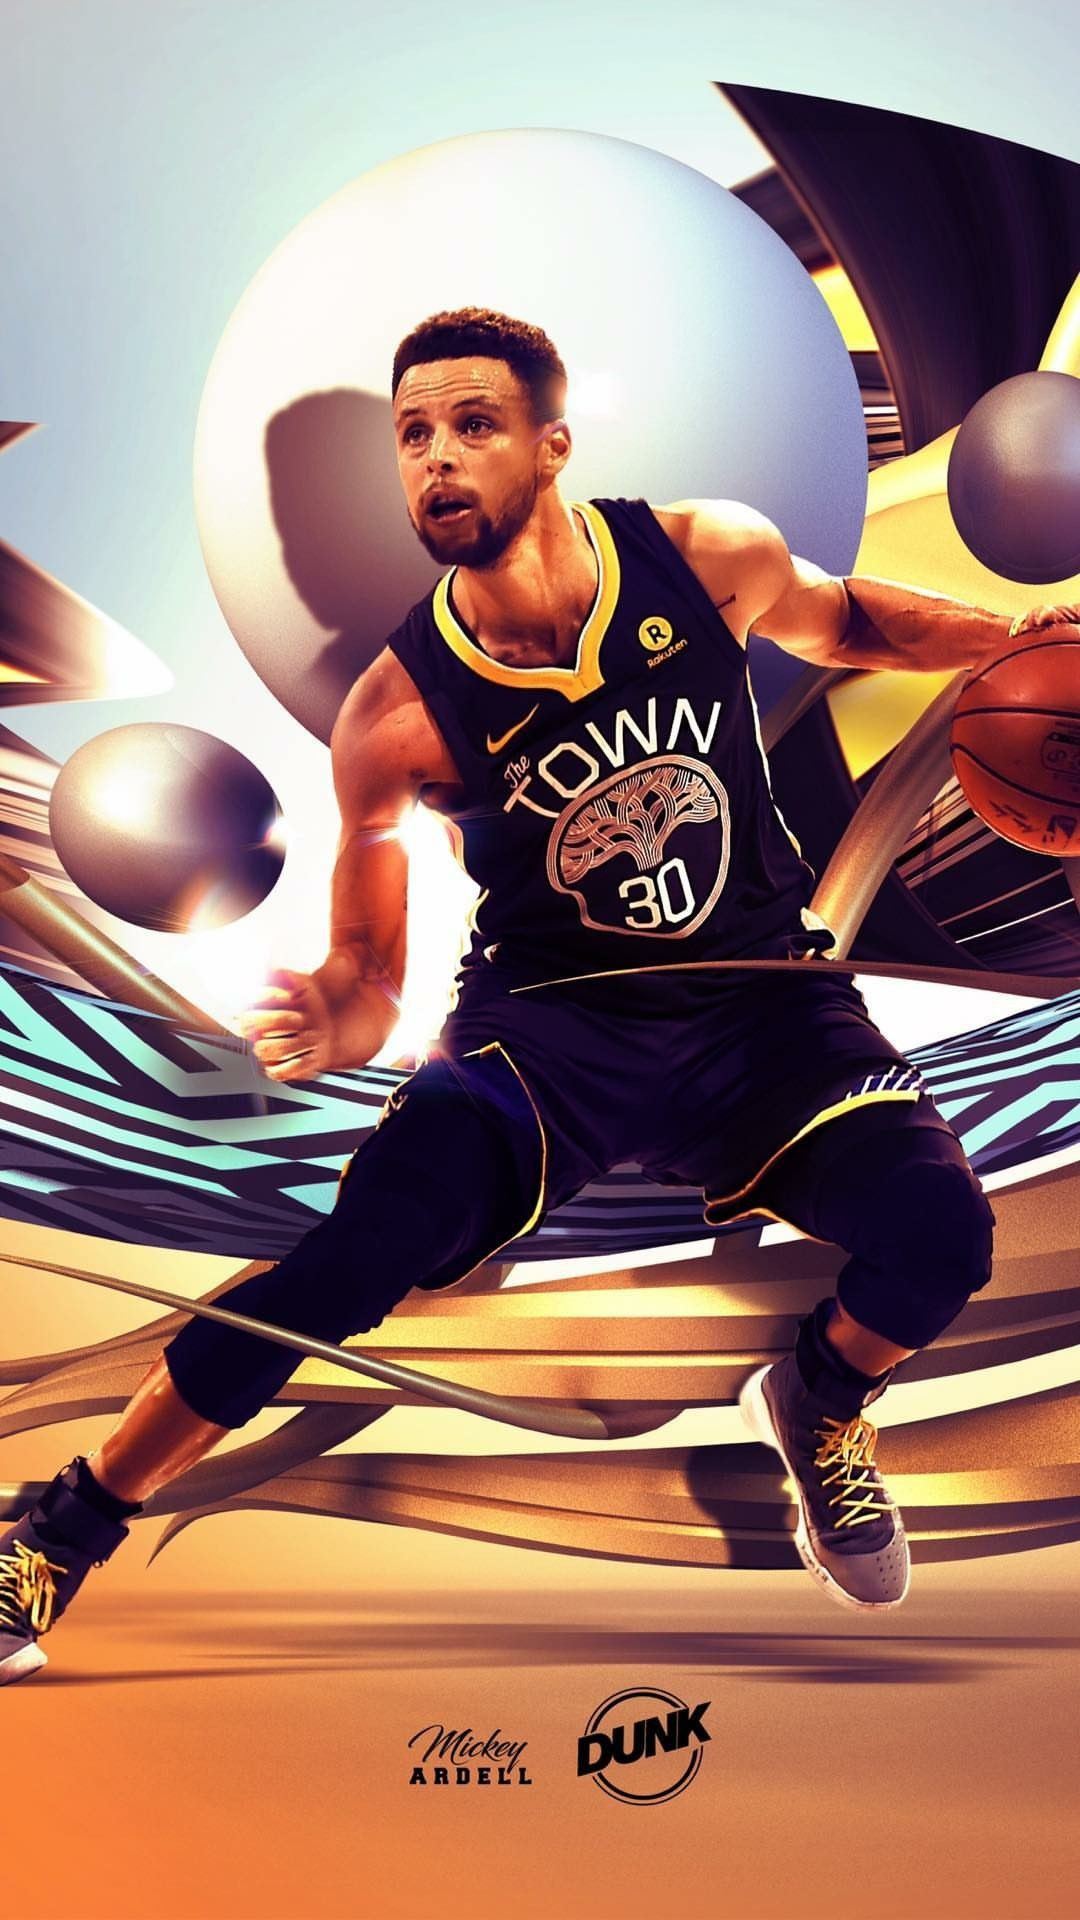 1080x1920 steph curry wallpaper iphone #440081